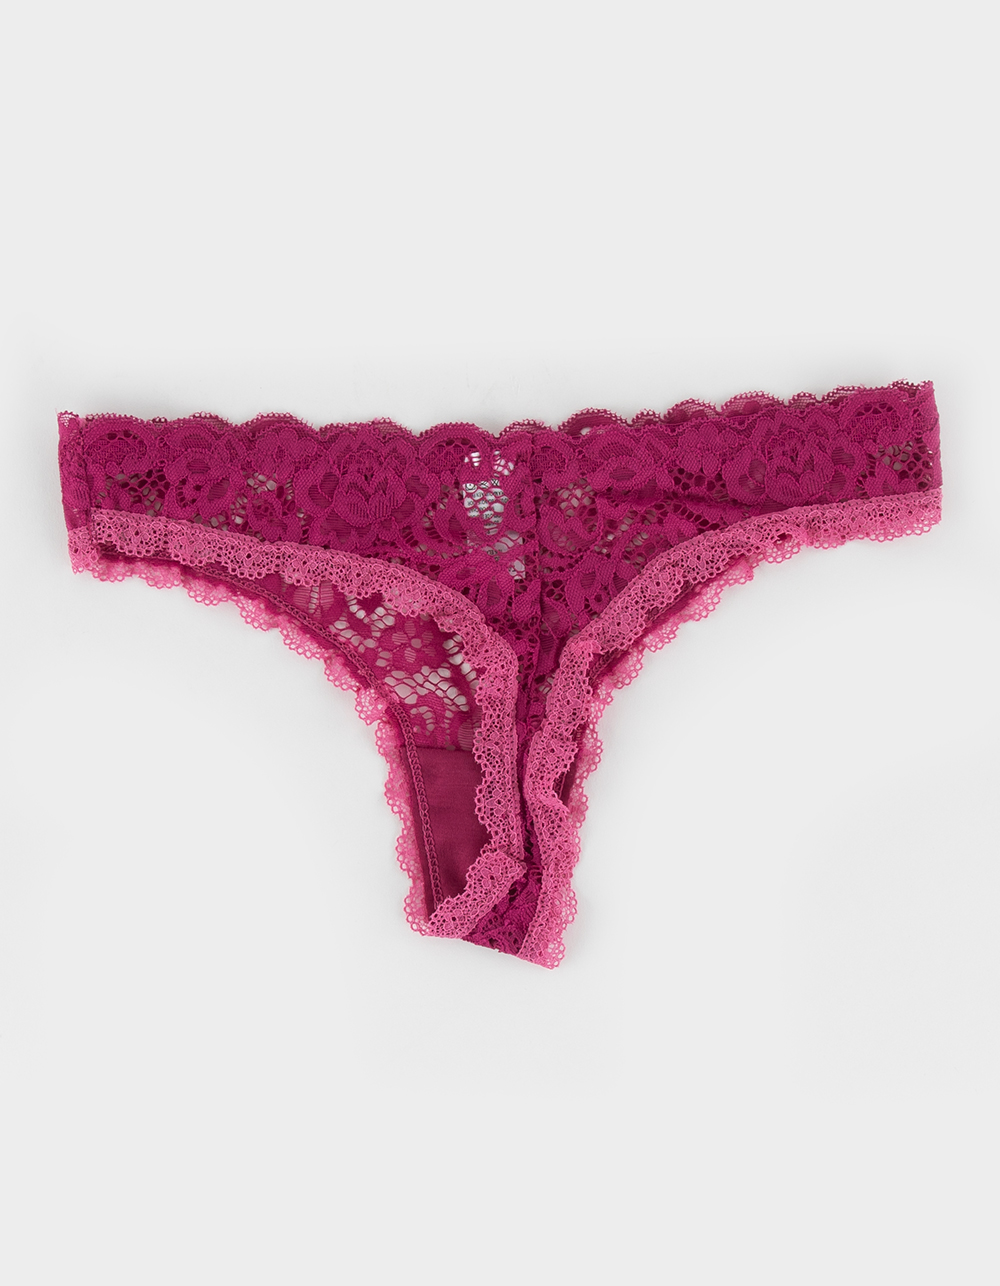 SPREE INTIMATES Scallop Lace Thong - LIME